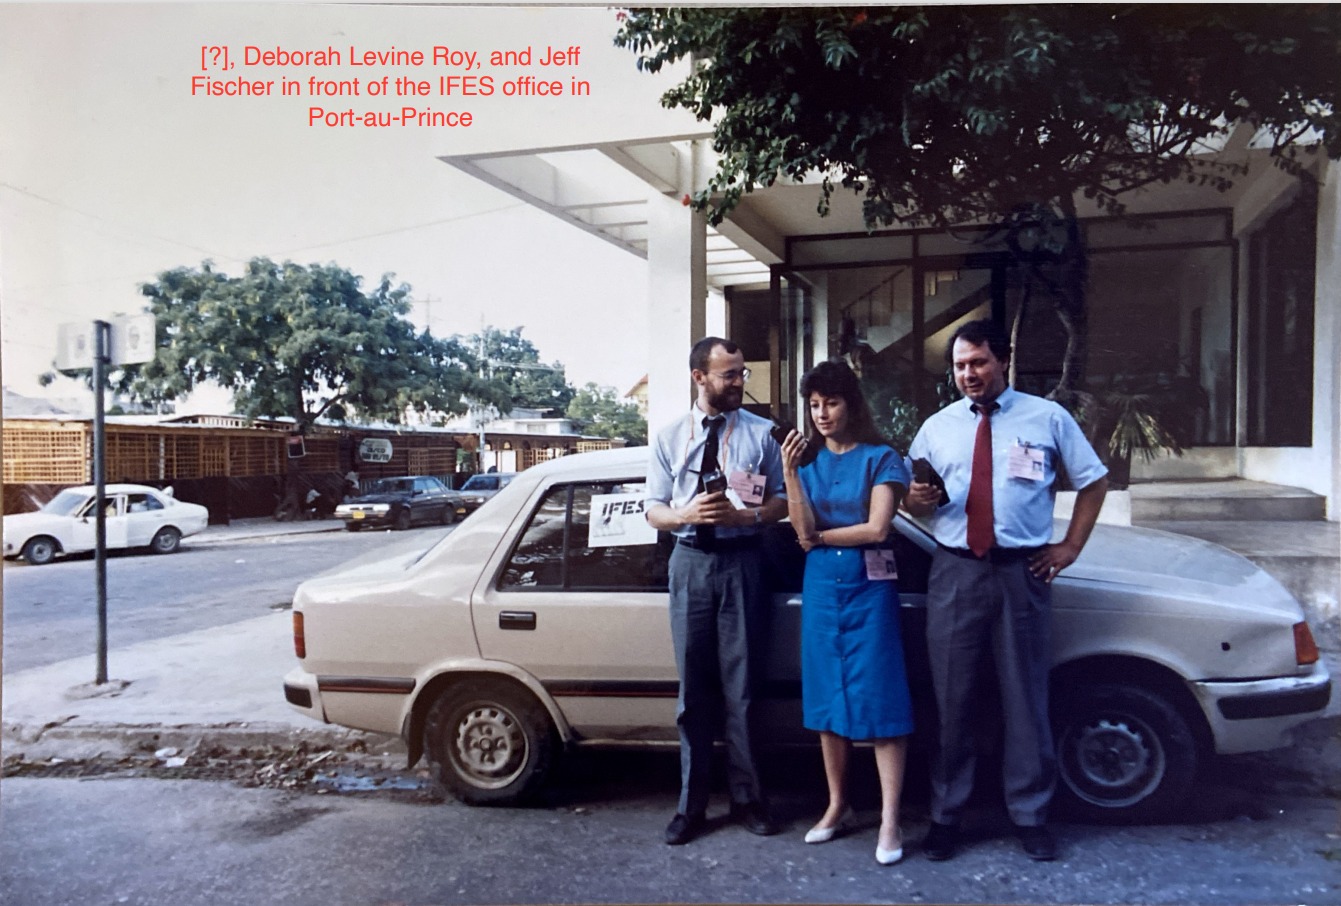 (?), Deborah Levine Roy, and Jeff Fischer in front of the IFES office in Port-au-Prince